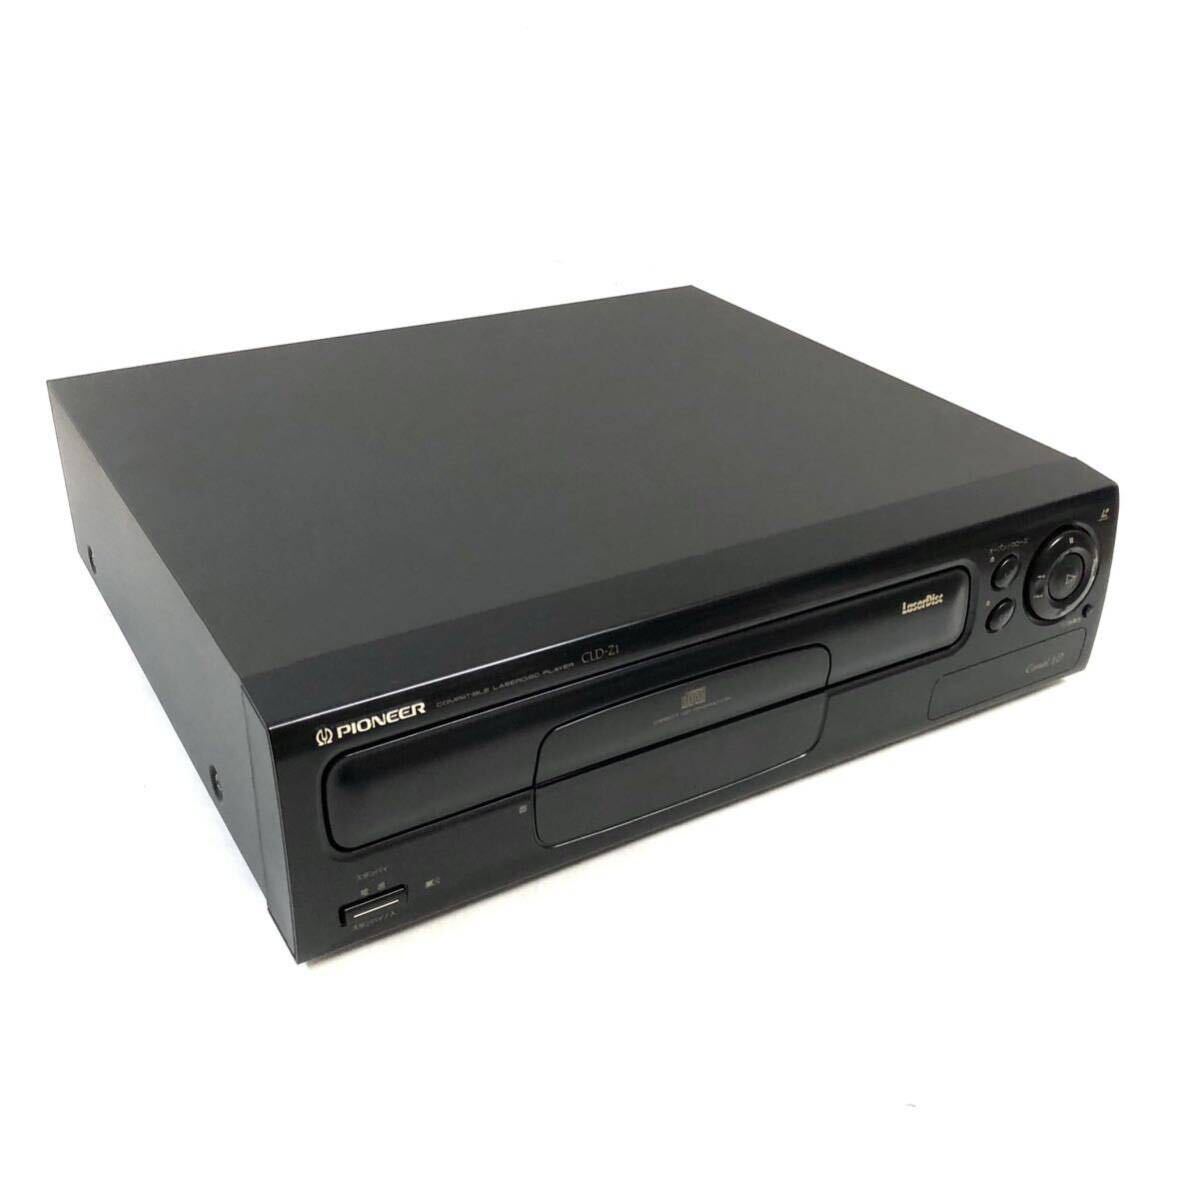  beautiful goods PIONEER Pioneer CLD-Z1 laser disk player original remote control attaching maintenance goods LD player 